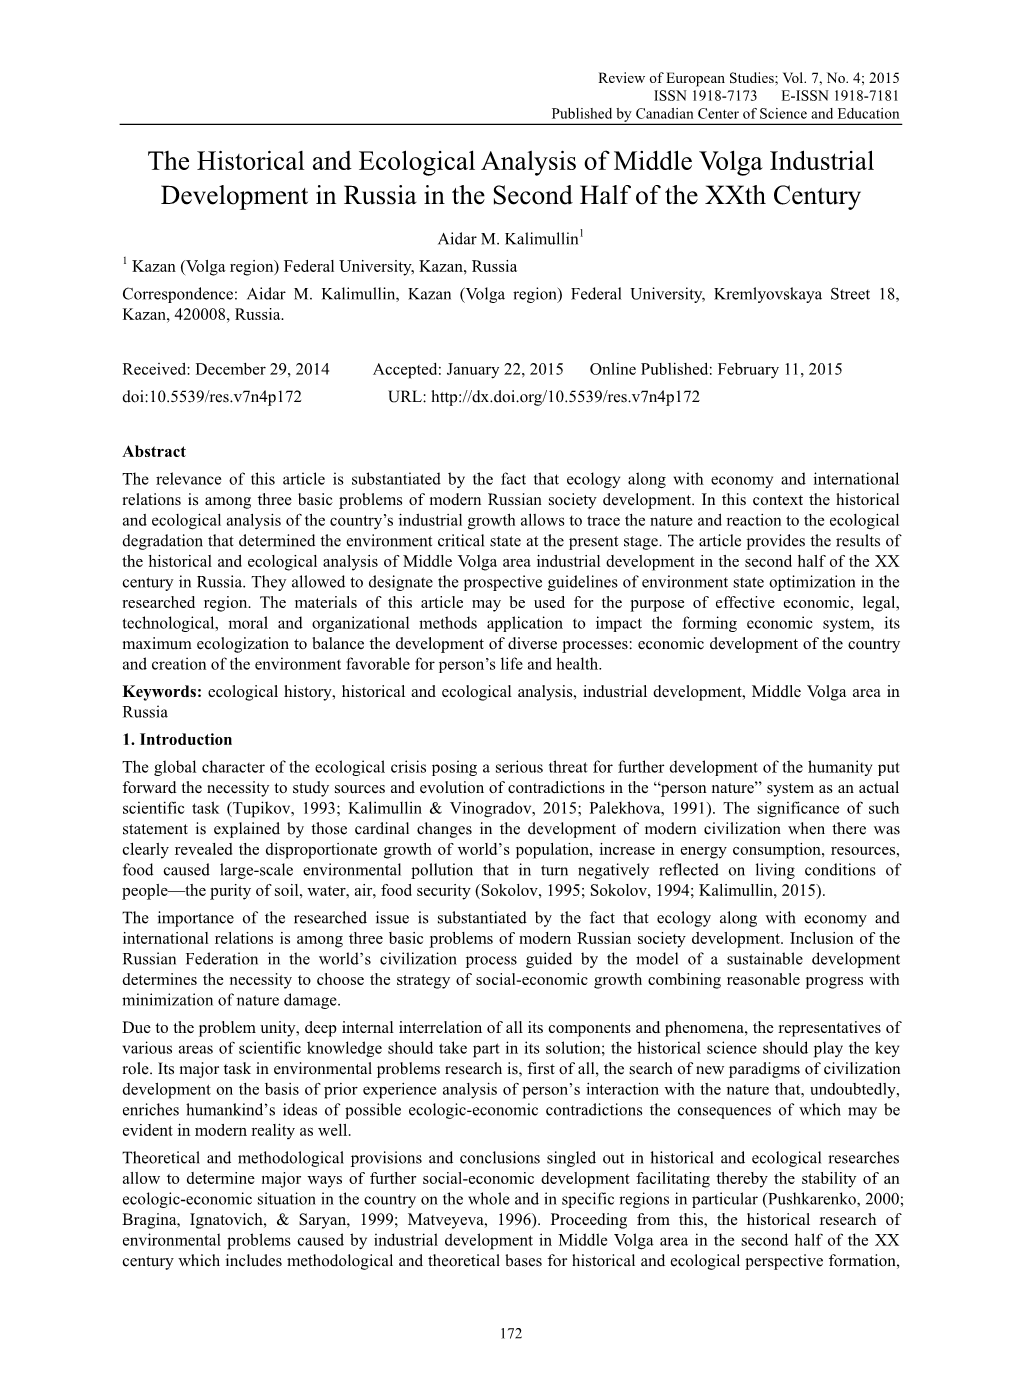 The Historical and Ecological Analysis of Middle Volga Industrial Development in Russia in the Second Half of the Xxth Century